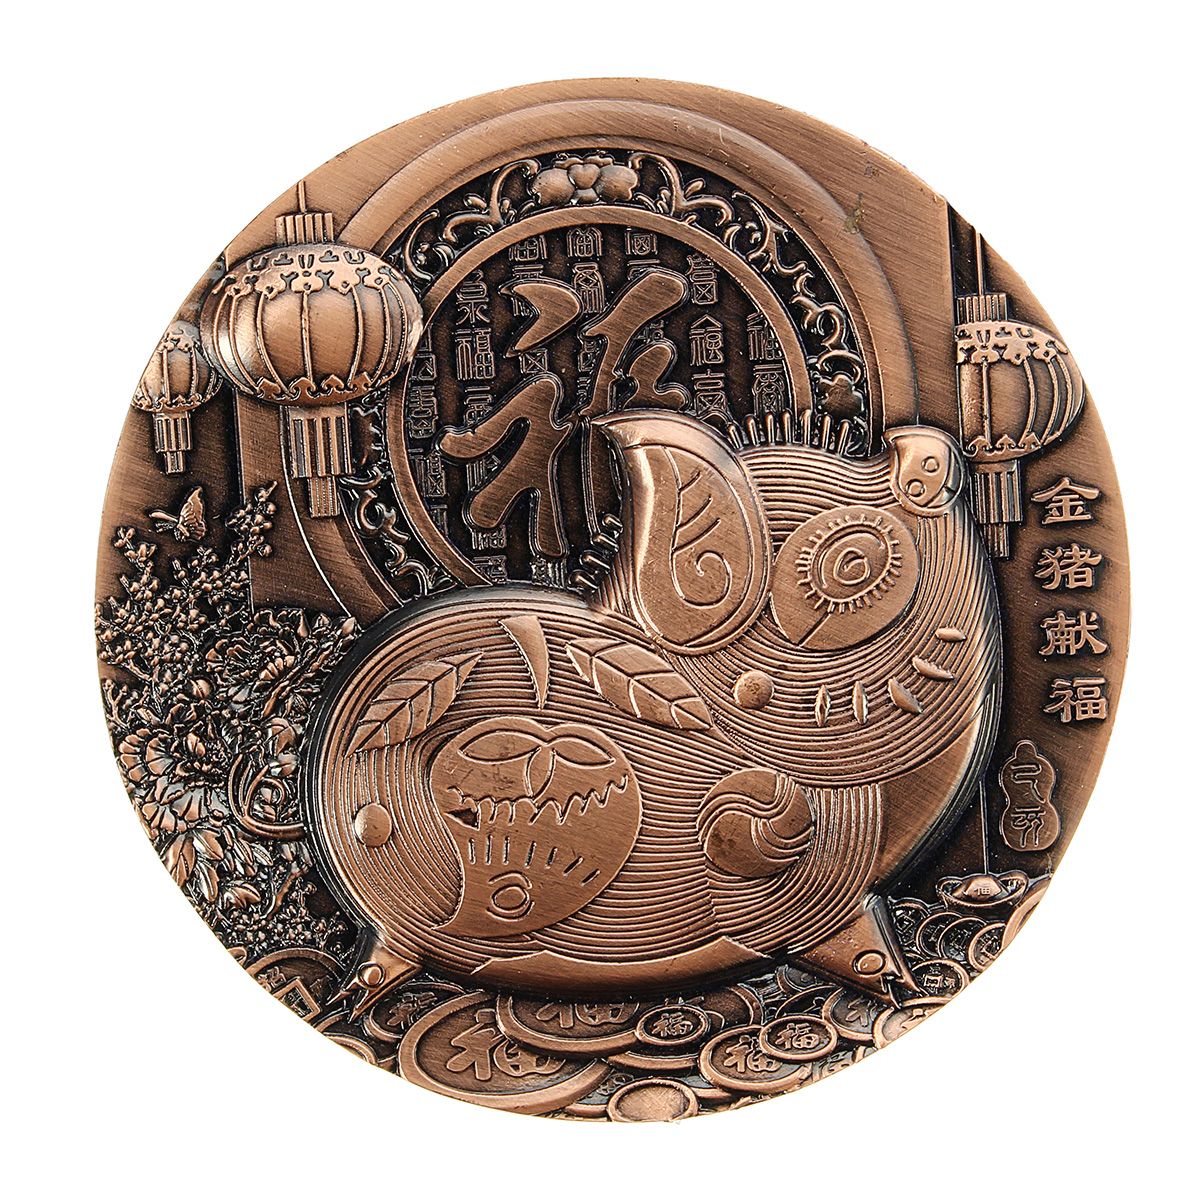 2019-Copper-Chinese-Lunar-Year-of-the-Pig-Coin-Collection-Luck-Mascot-Gift-Decorations-1566635